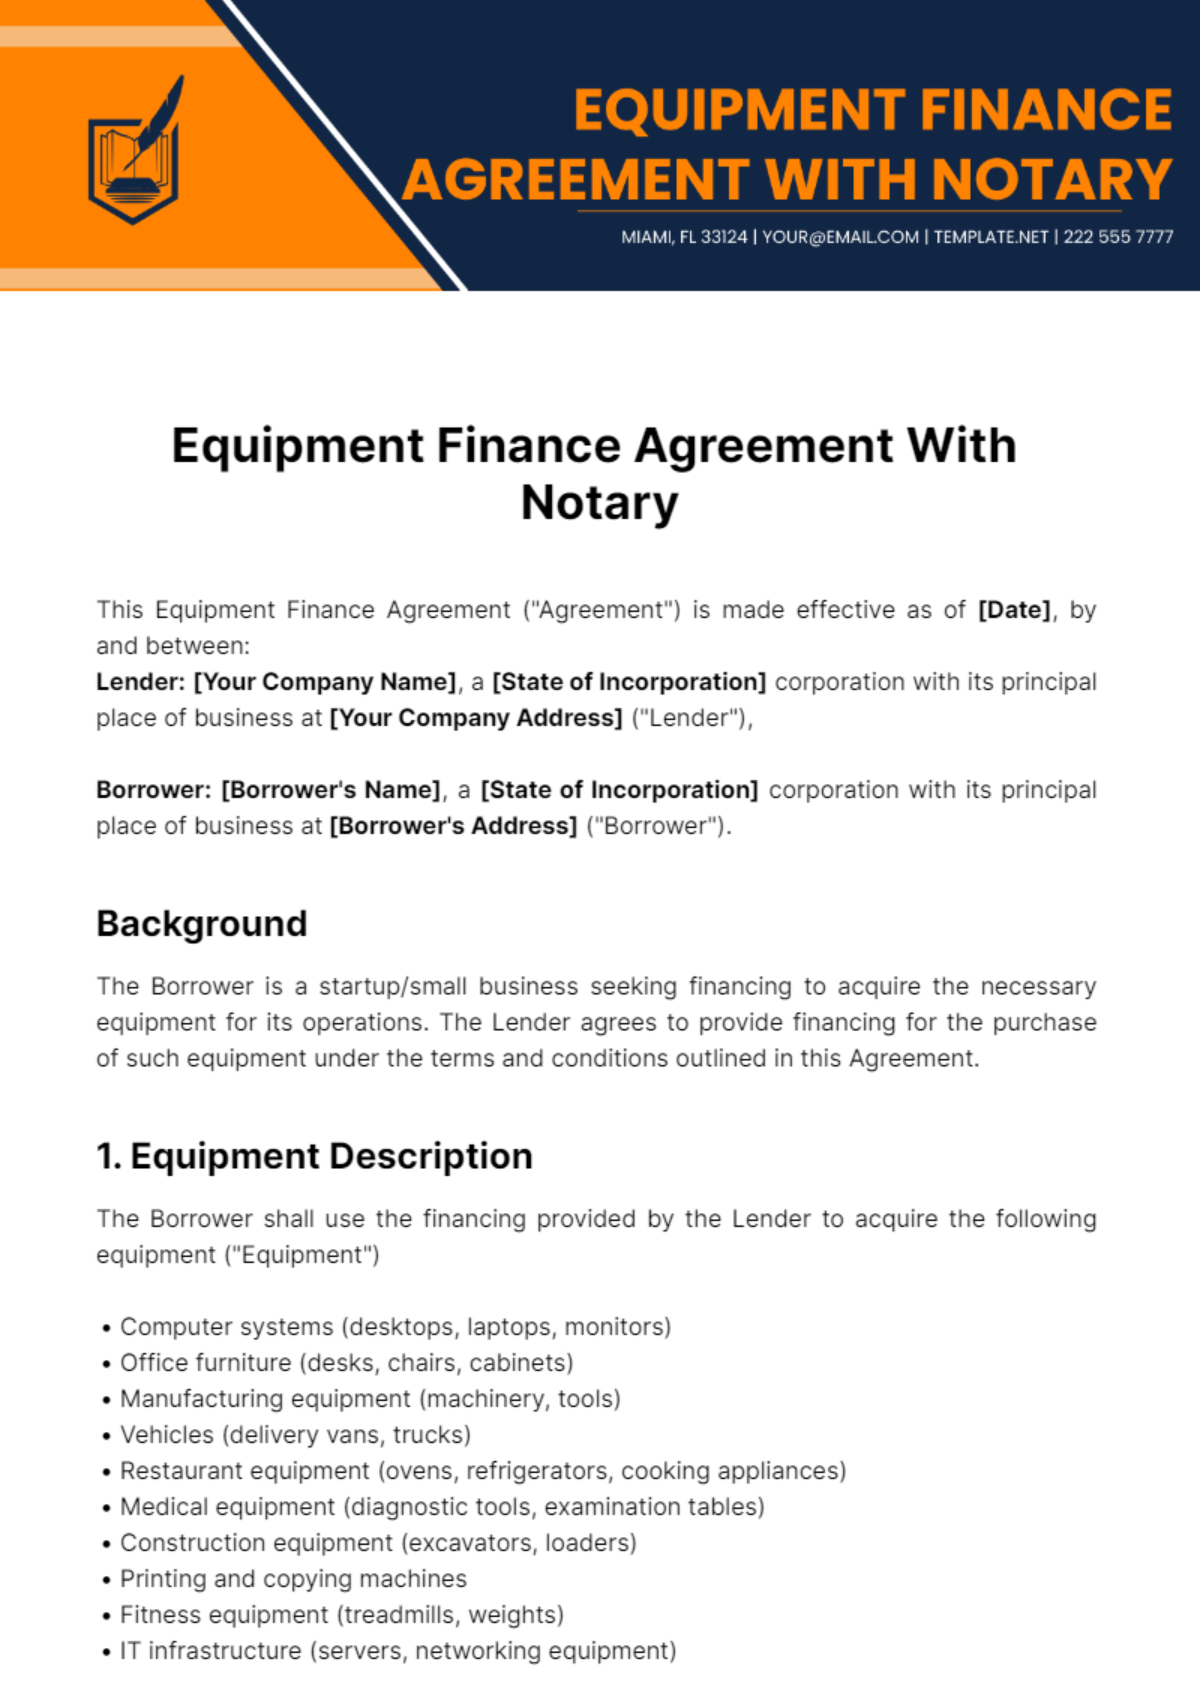 Free Equipment Finance Agreement With Notary Template